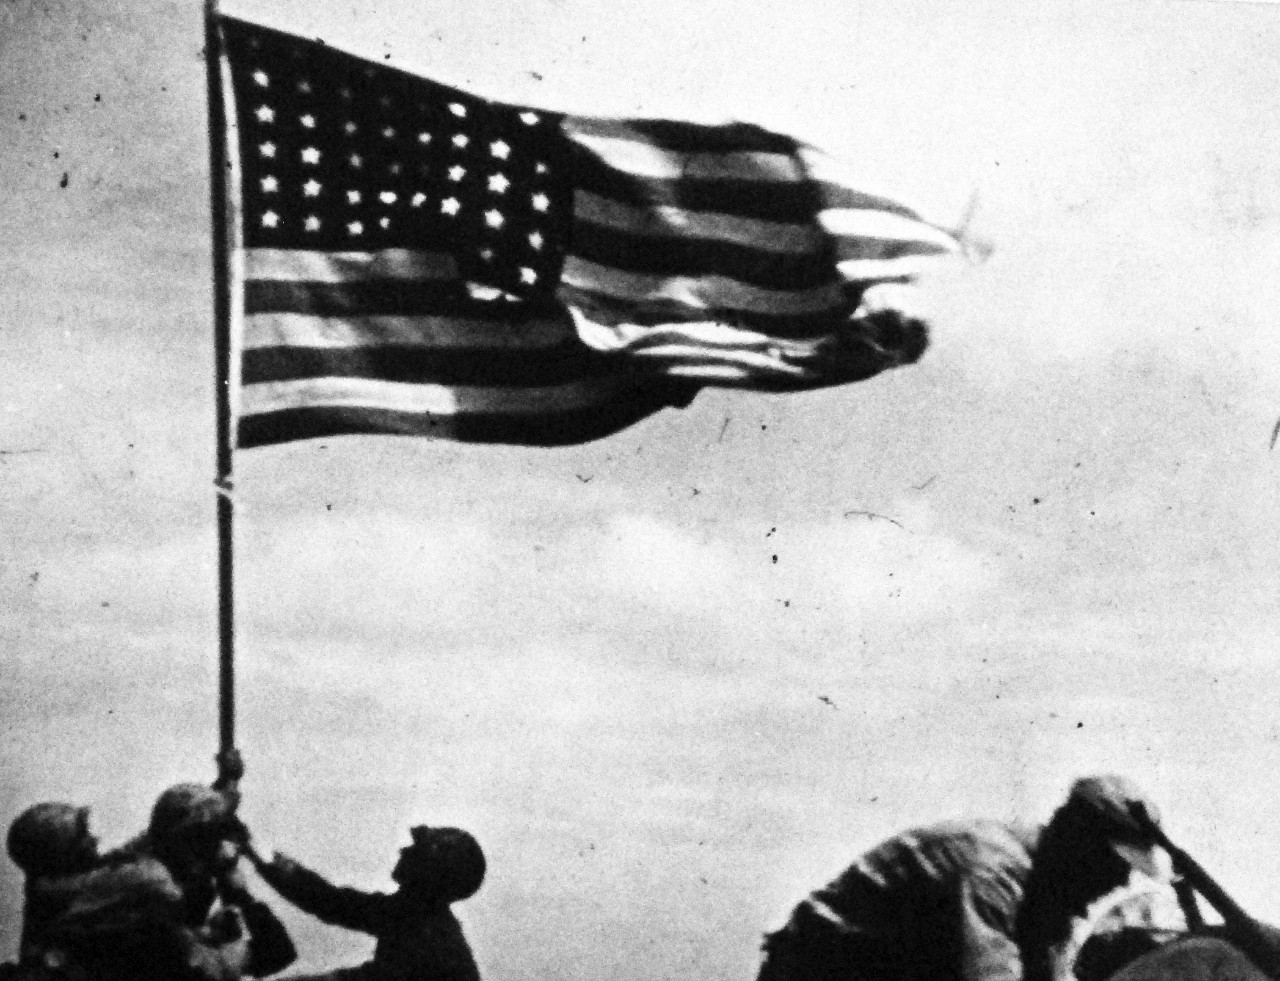 127-GW-319-146244:   Iwo Jima Operations, February 1945.  Iwo Jima Flag Raising on Mt. Suribachi.  Photographed by Dick, copied on October 3, 1946.     Official U.S. Marine Corps Photograph, now in the collections of the National Archives.  (2016/09/06).